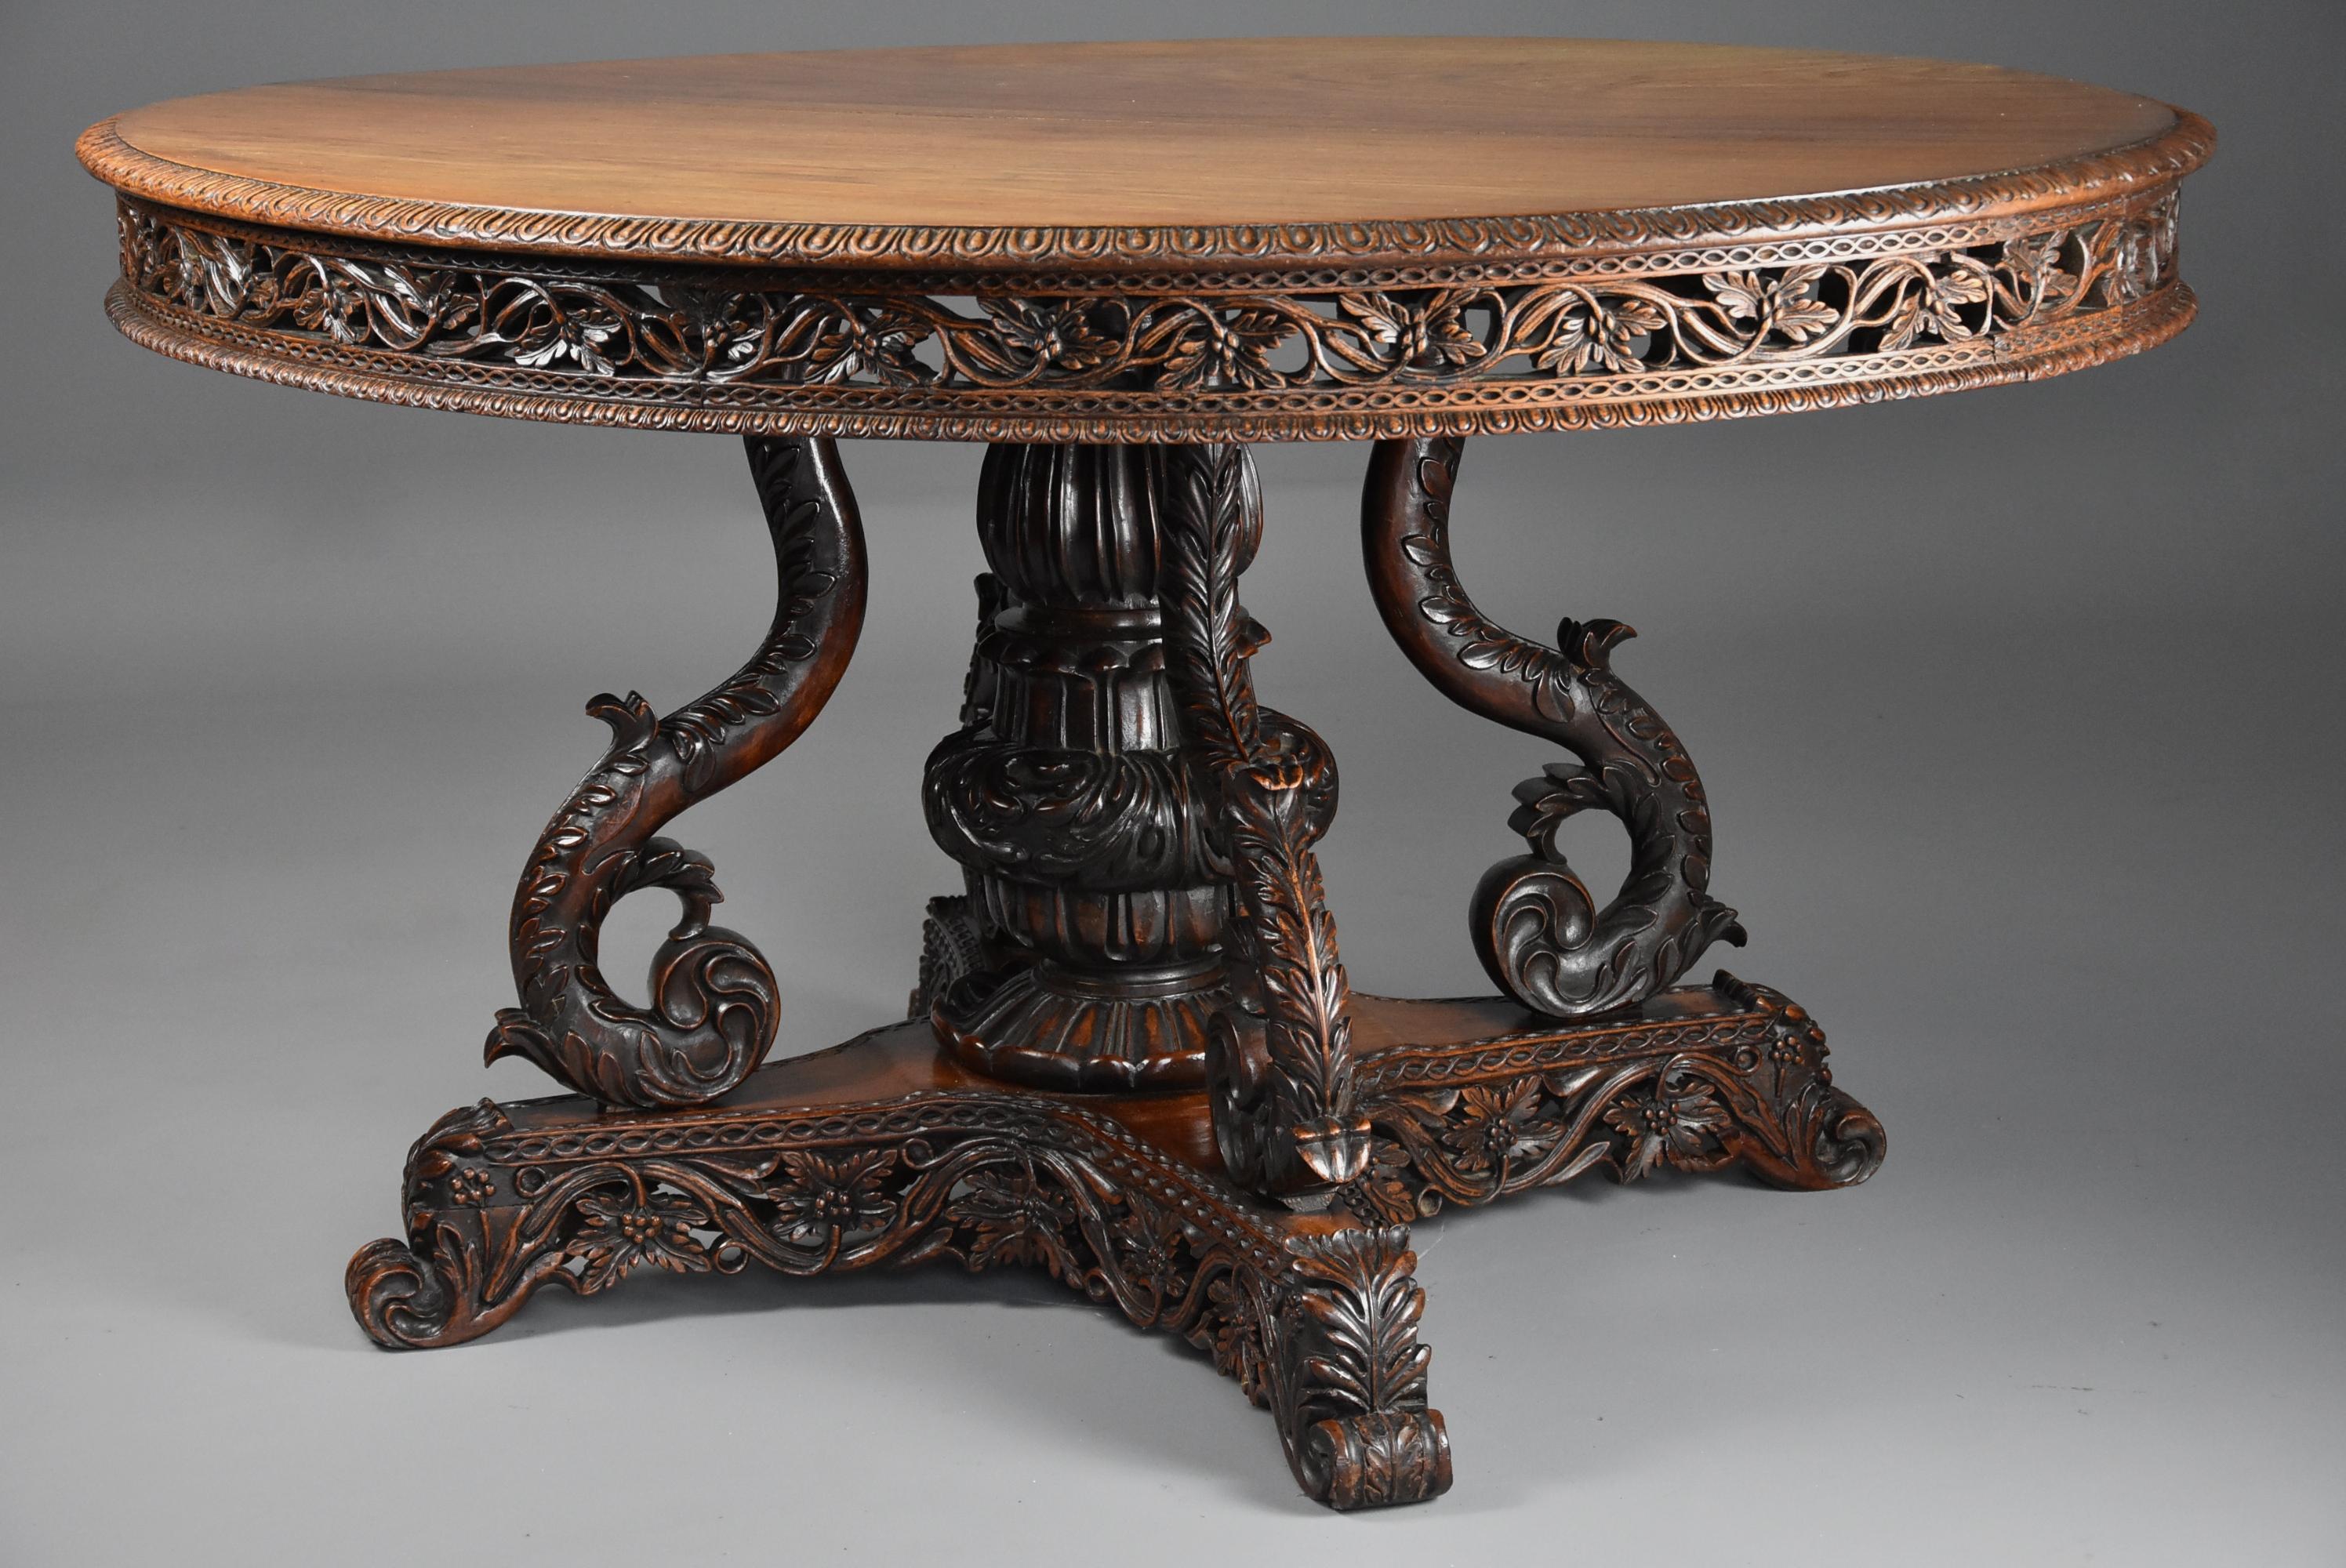 A mid-19th century Anglo Indian padouk centre table of oval form with superb faded patina (color) probably from the Bombay region of India.

This table consists of a superbly faded solid padouk oval top with carved moulded edge leading down to a